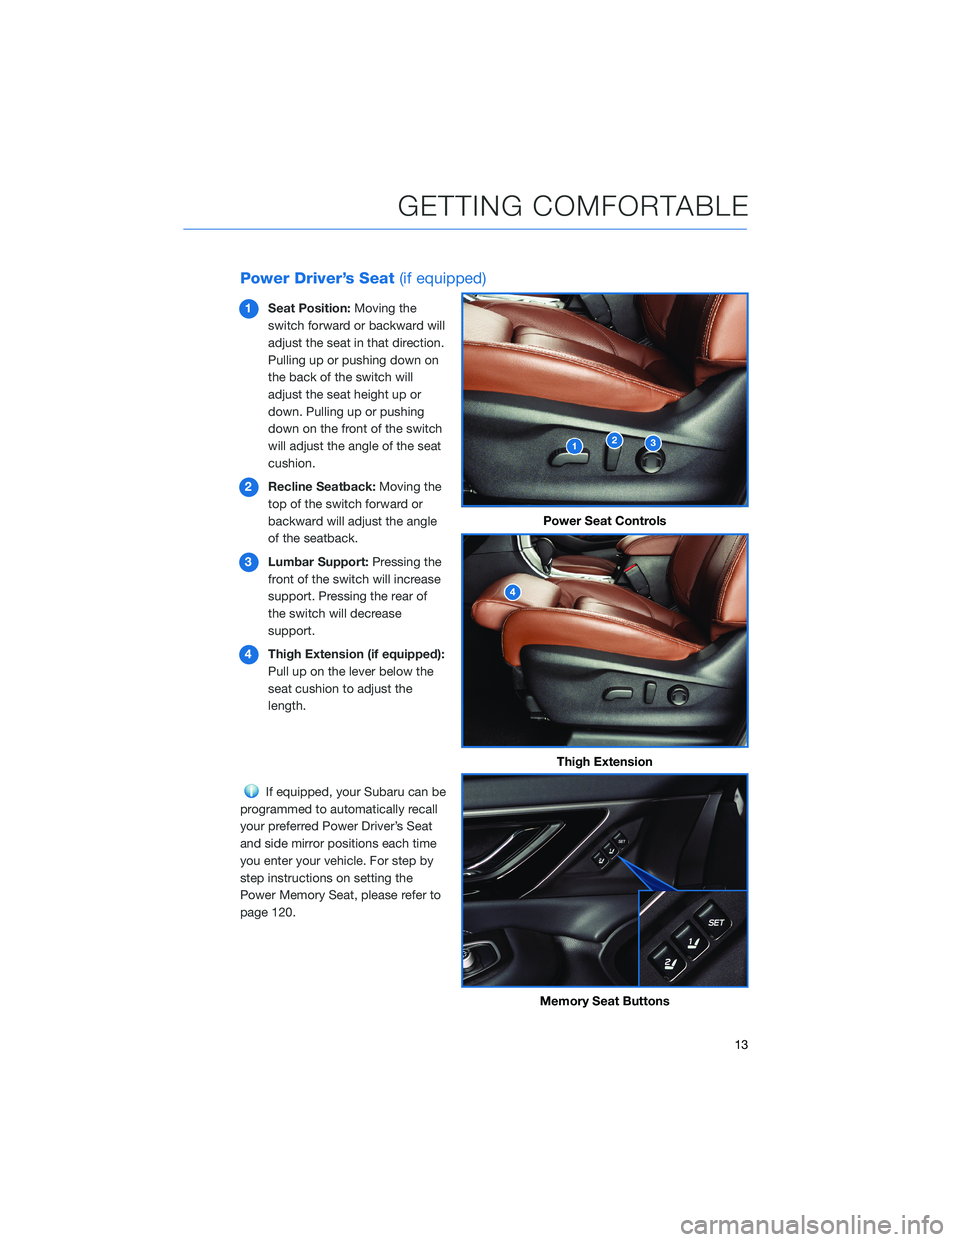 SUBARU LEGACY 2022  Getting Started Guide Power Driver’s Seat(if equipped)
1Seat Position:Moving the
switch forward or backward will
adjust the seat in that direction.
Pulling up or pushing down on
the back of the switch will
adjust the sea